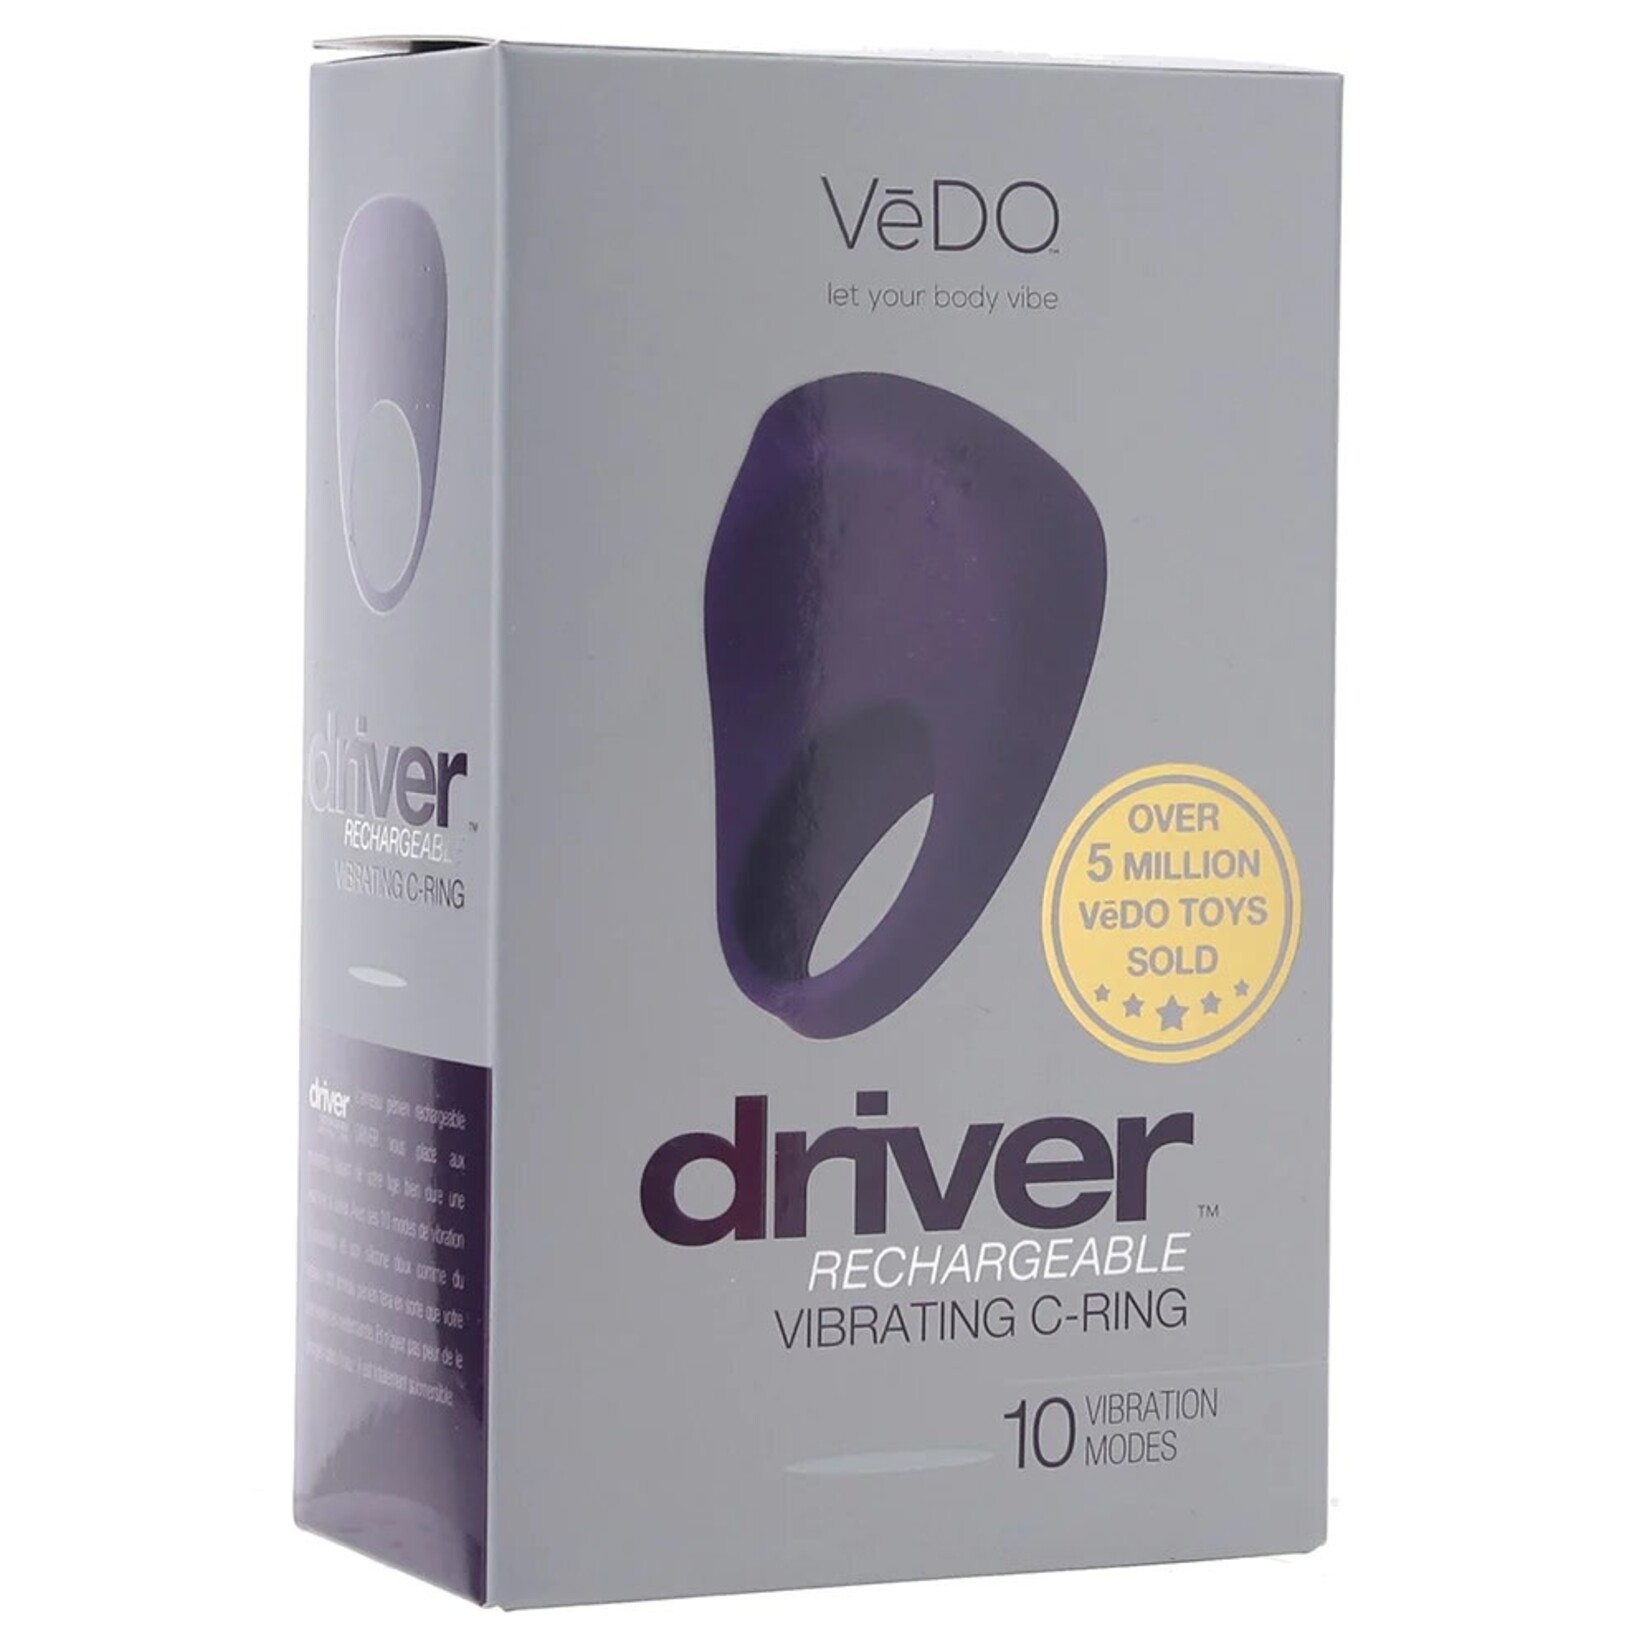 VEDO VEDO - DRIVER RECHARGEABLE VIBRATING C-RING IN PURPLE